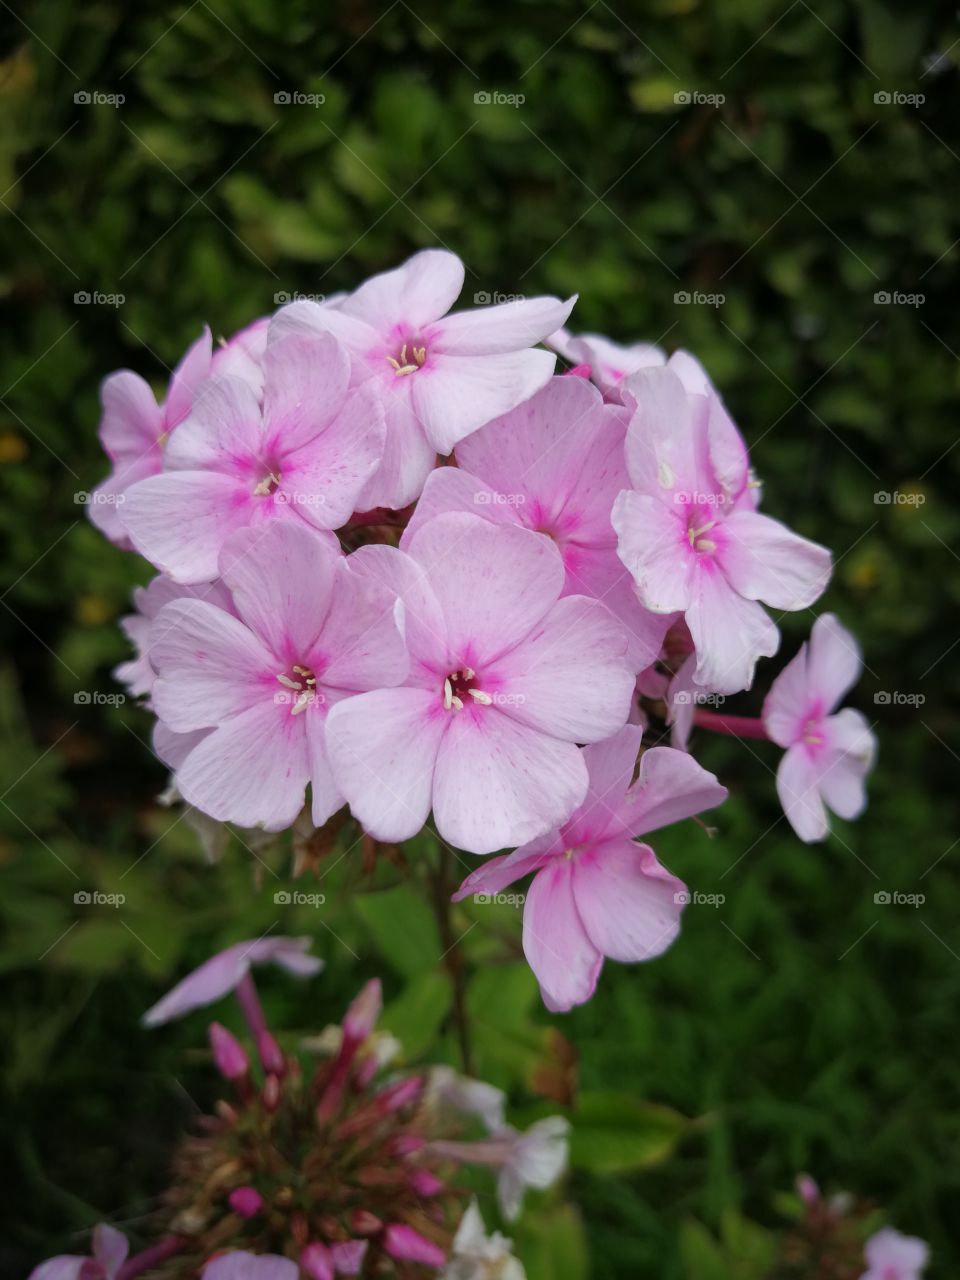 Garden treasures 🌺 without filter - phlox